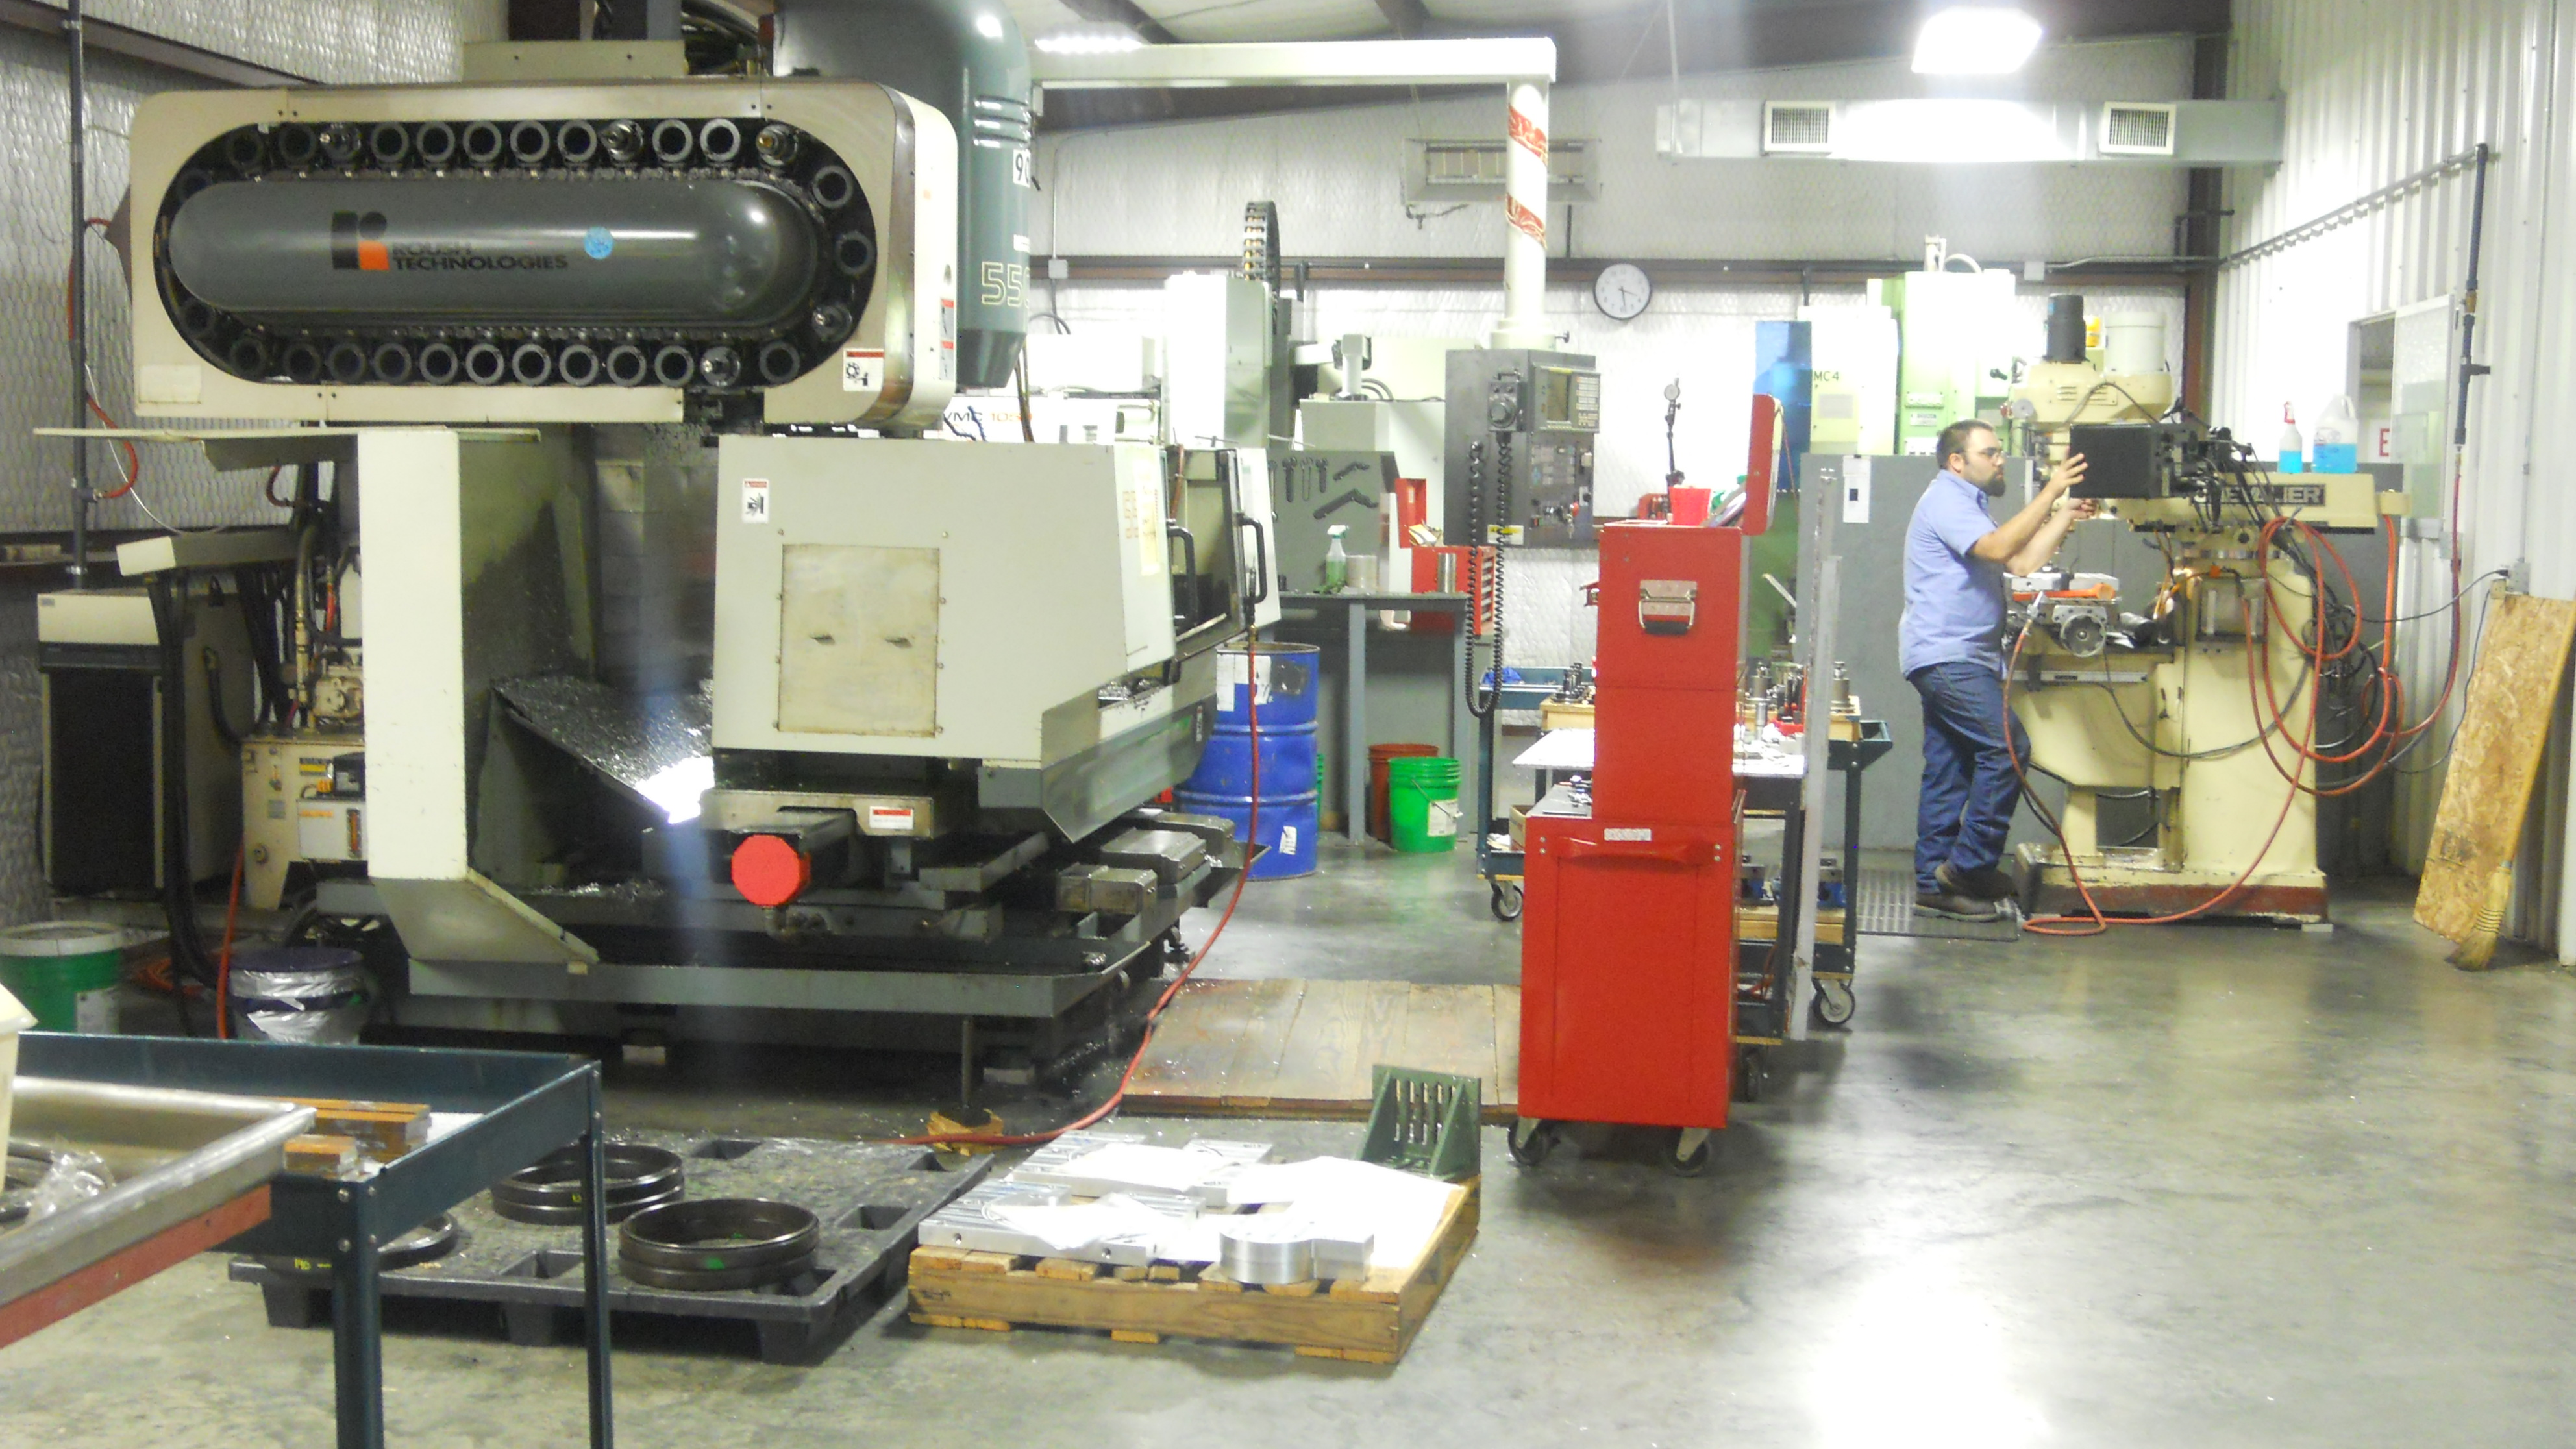 MIC-ALL's Machine Shop in Houston, TX makes precision parts for oil,gas and energy industry